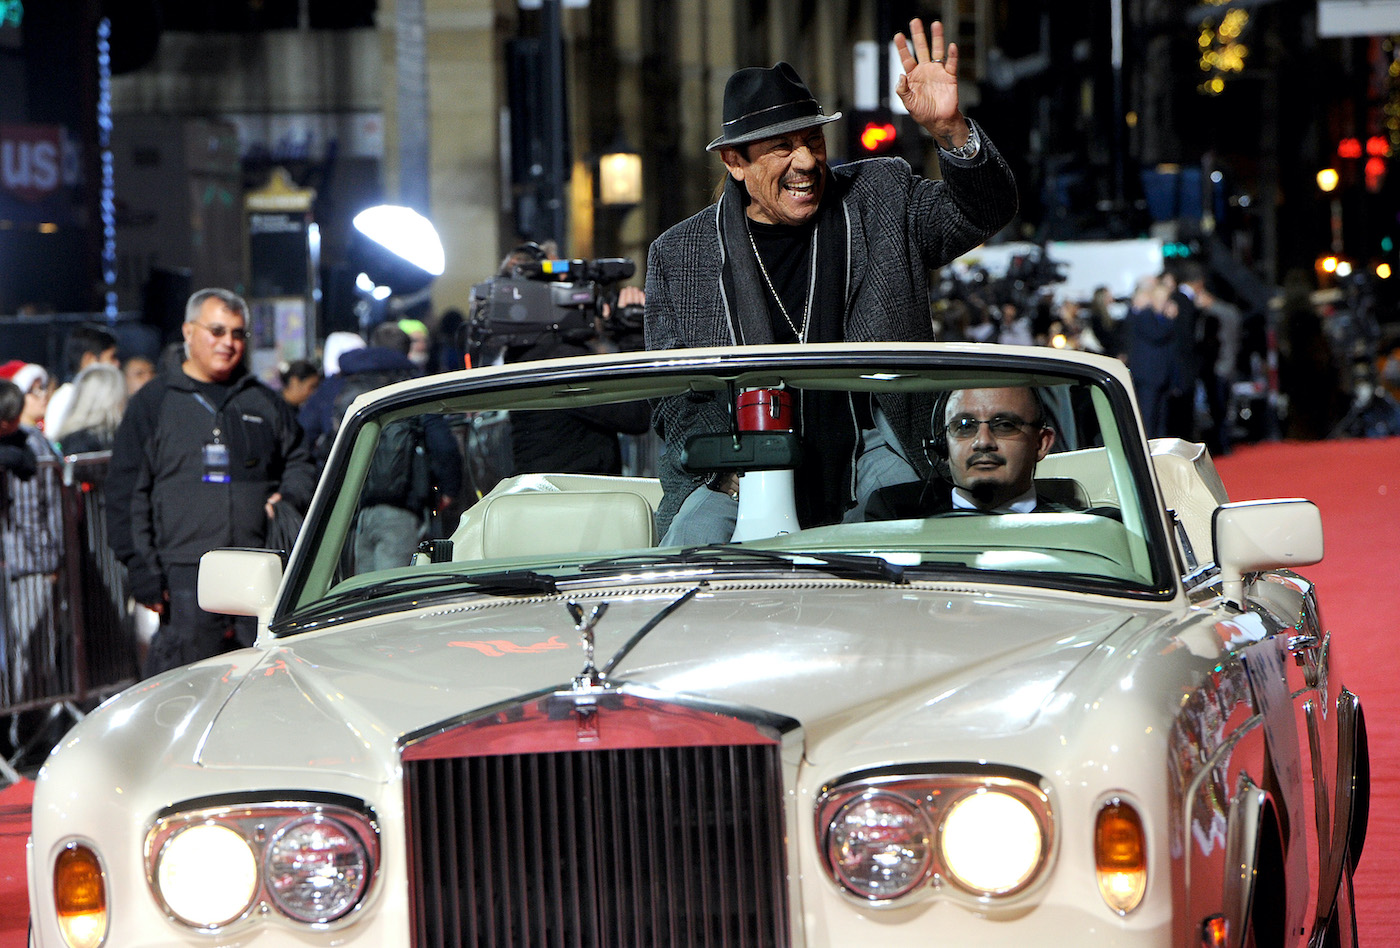 Danny Trejo waves to the crowd from a convertible car in a parade